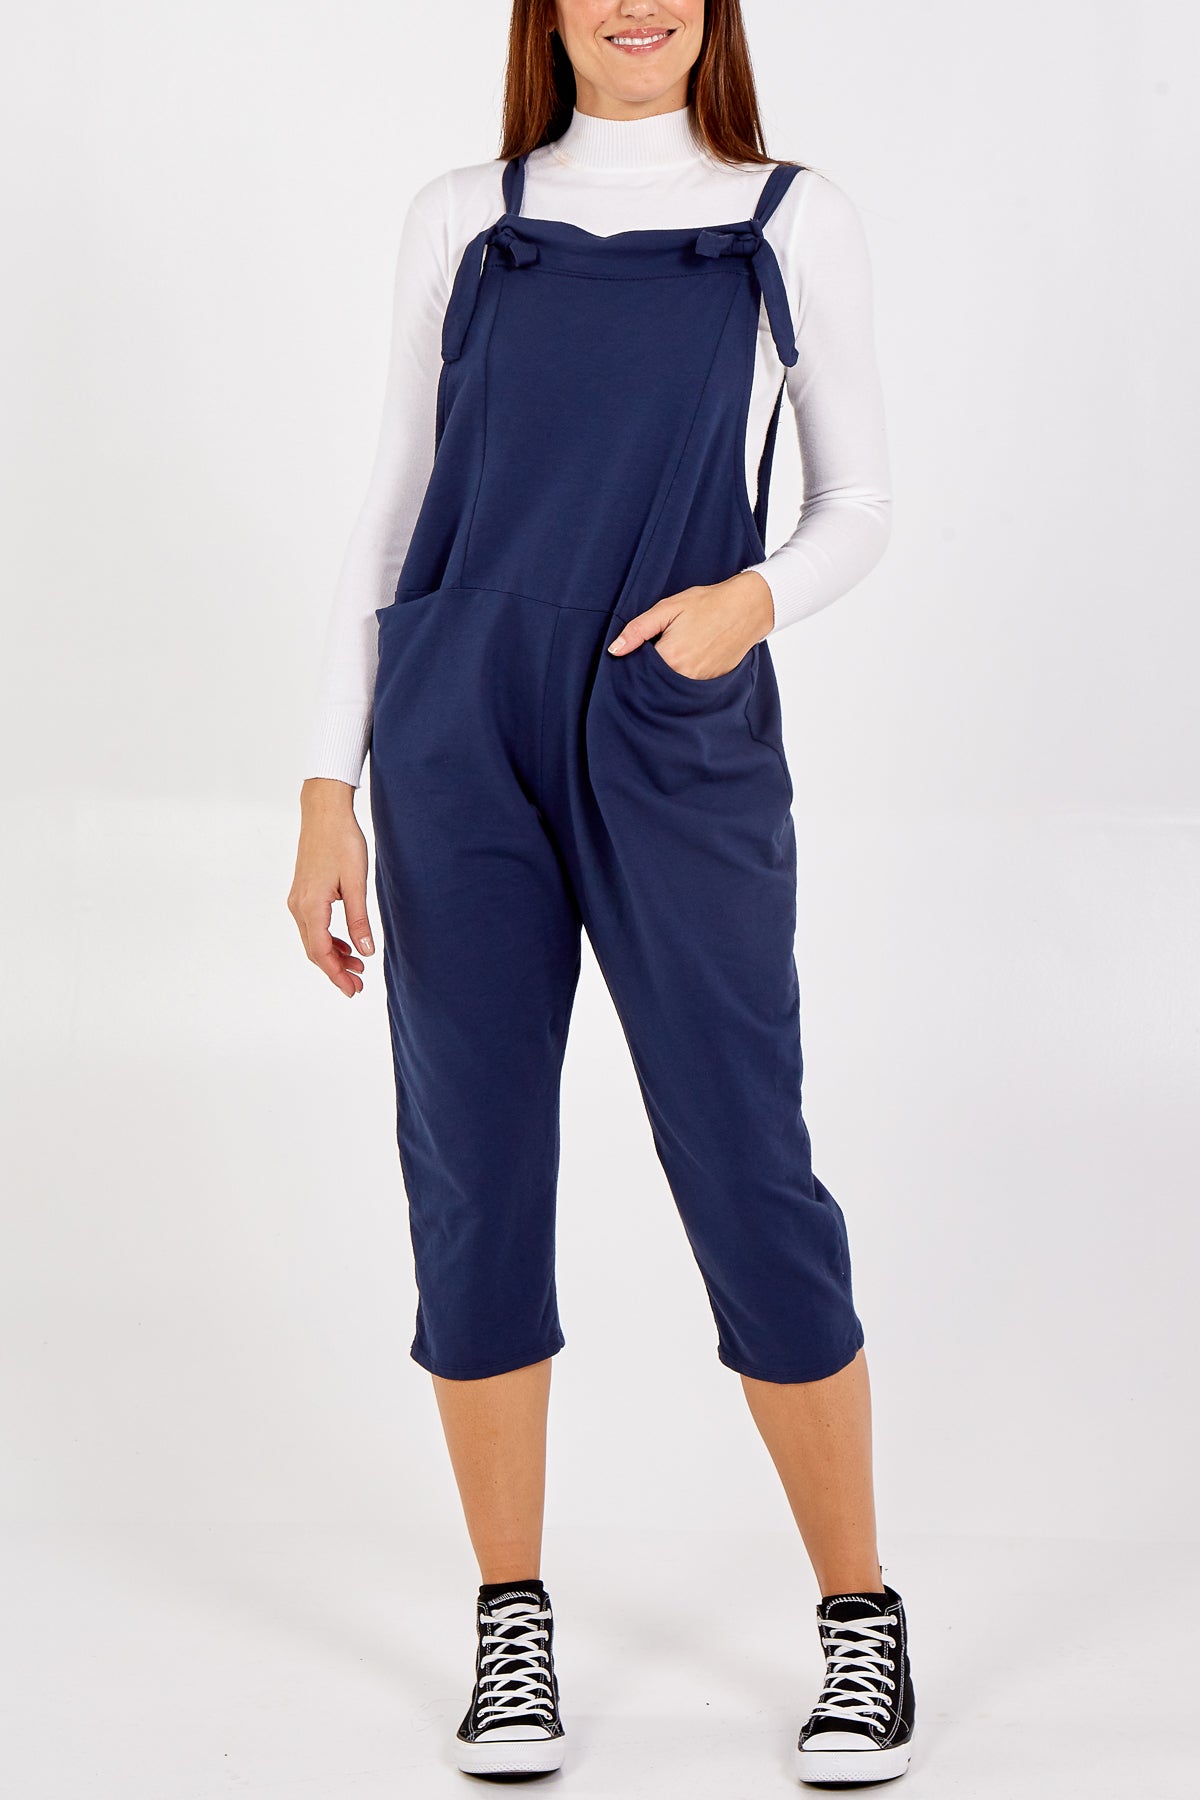 Plain Navy Blue Cropped Dungarees